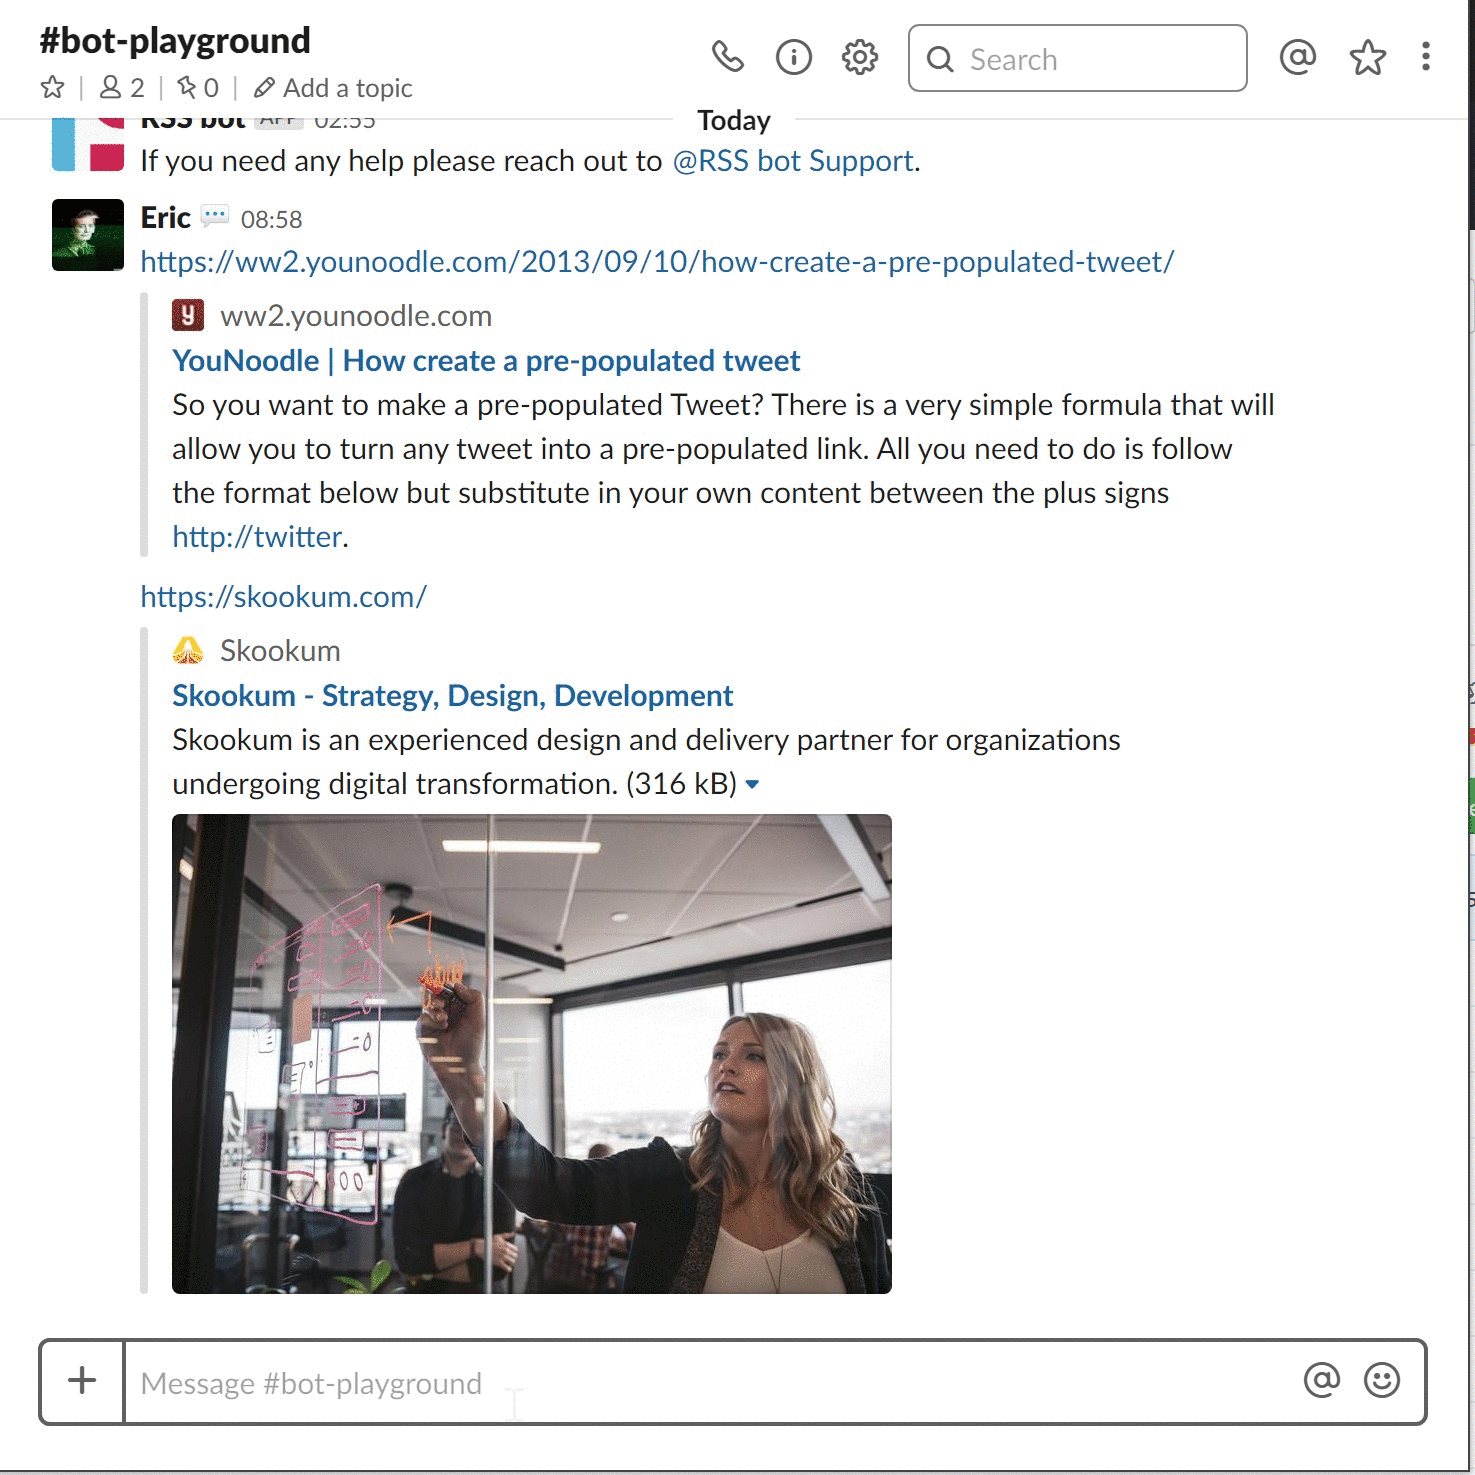 GIF of @RSS bot in asking user to add link to RSS feed